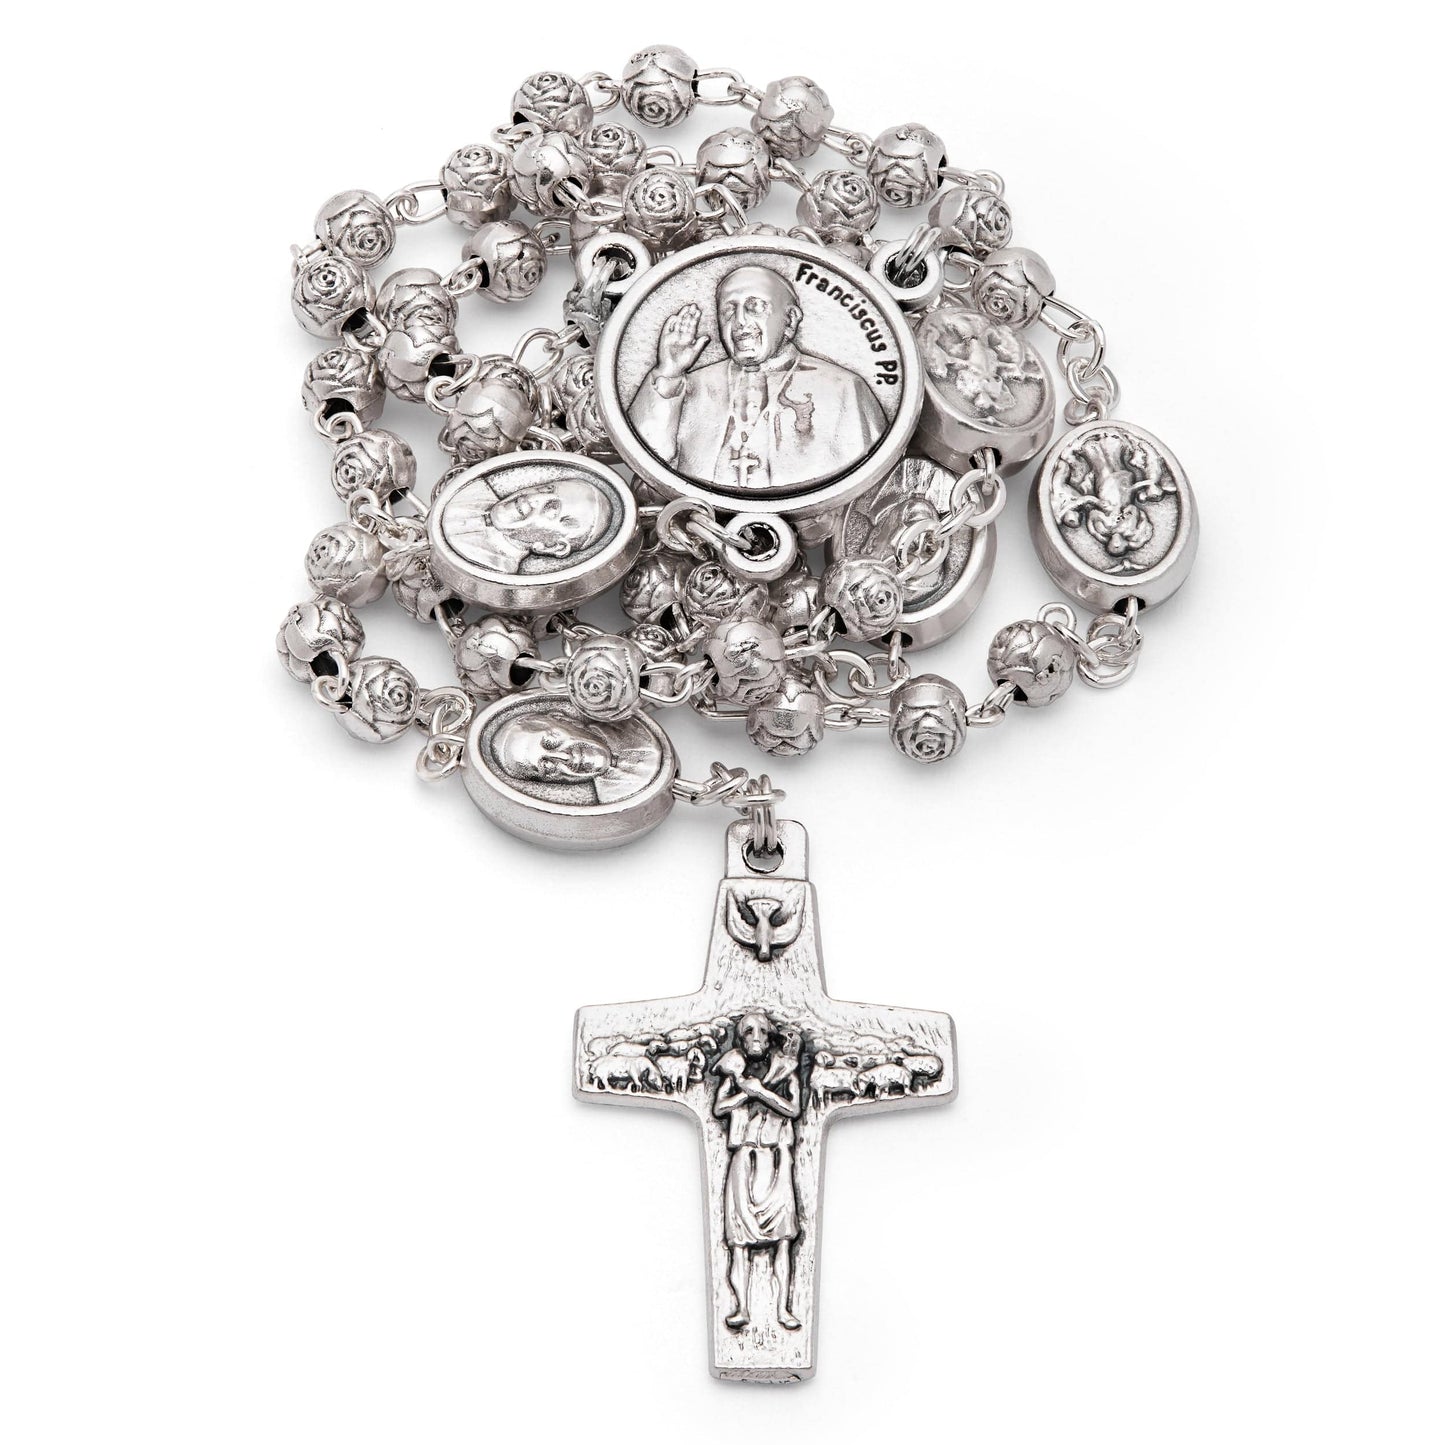 MONDO CATTOLICO Prayer Beads 35 cm (13.77 in) / 4 mm (0.15 in) Mary Undoer the Knots Rosary with Blue Holder